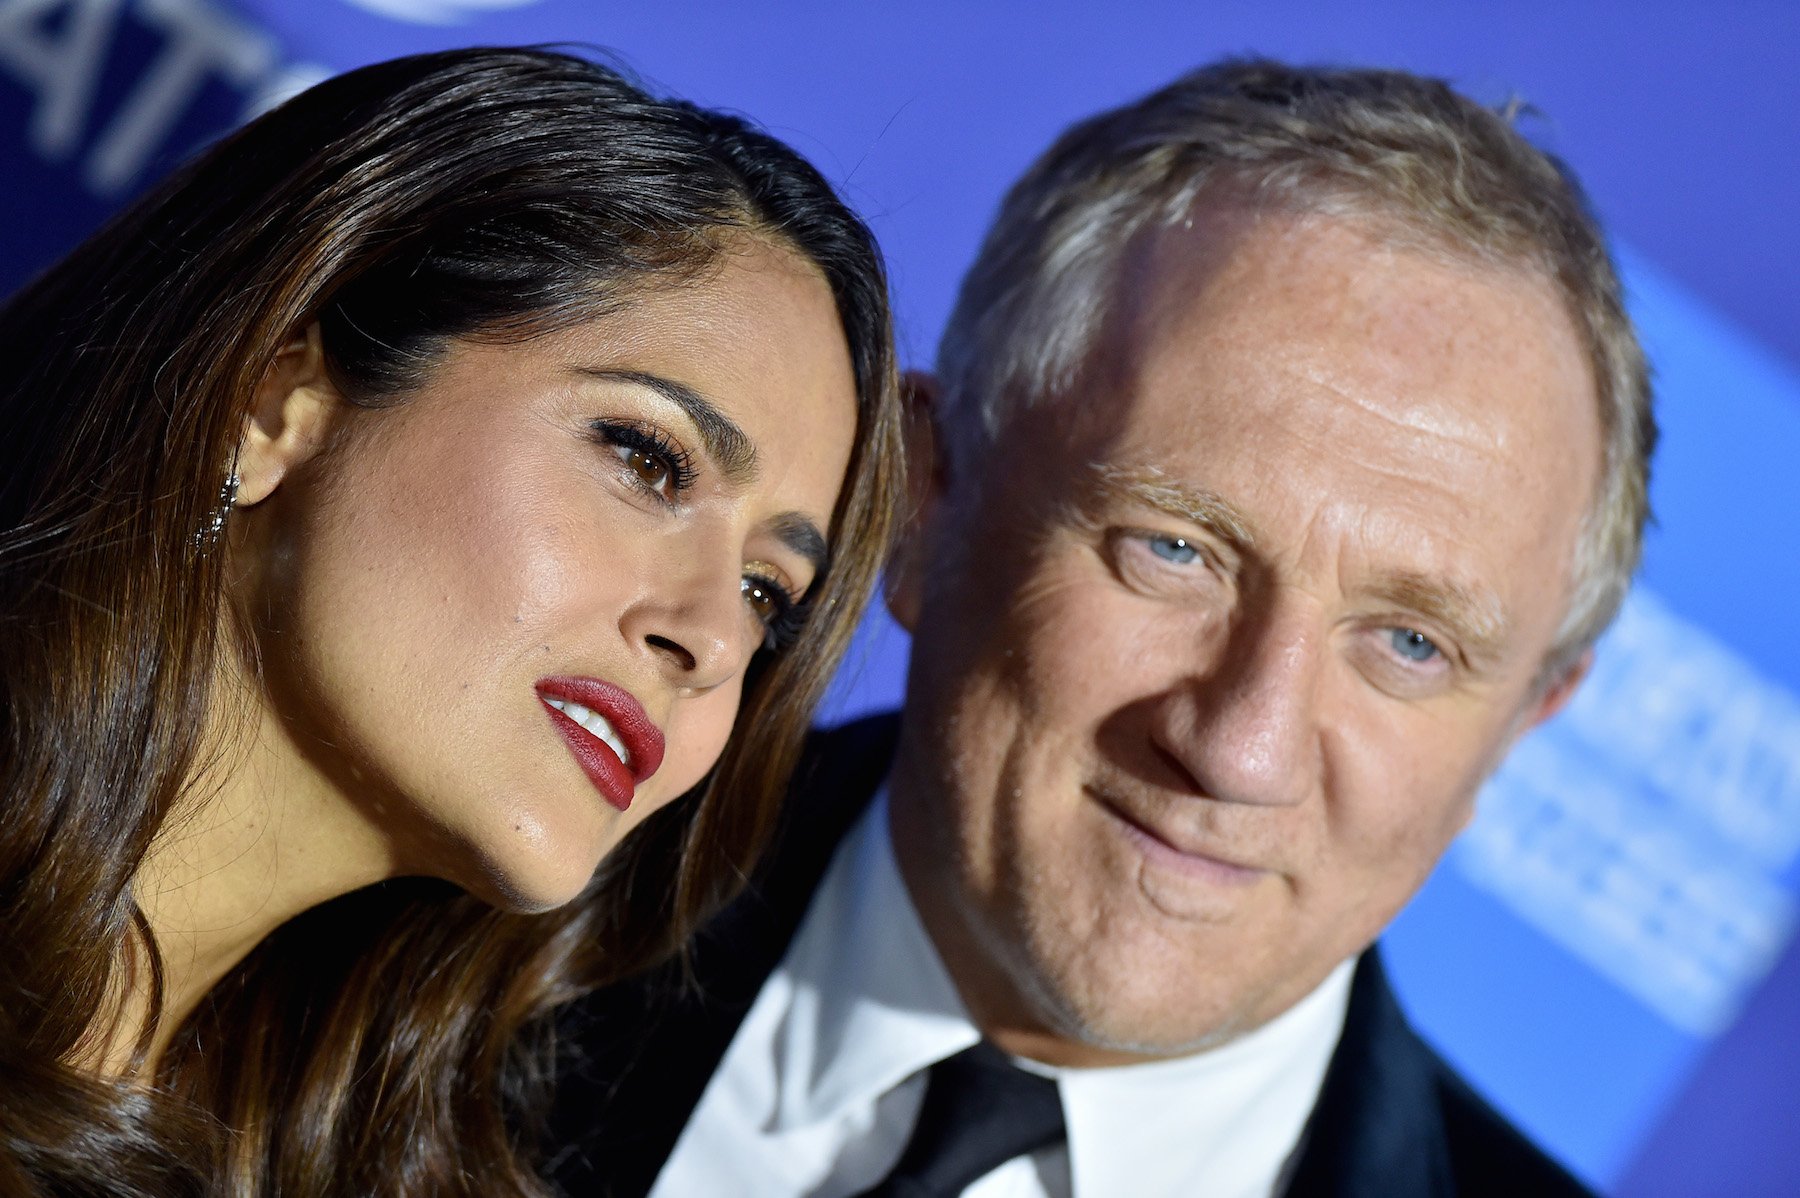 What Is Salma Hayek's Age and How Old Is Her Husband, François-Henri  Pinault?